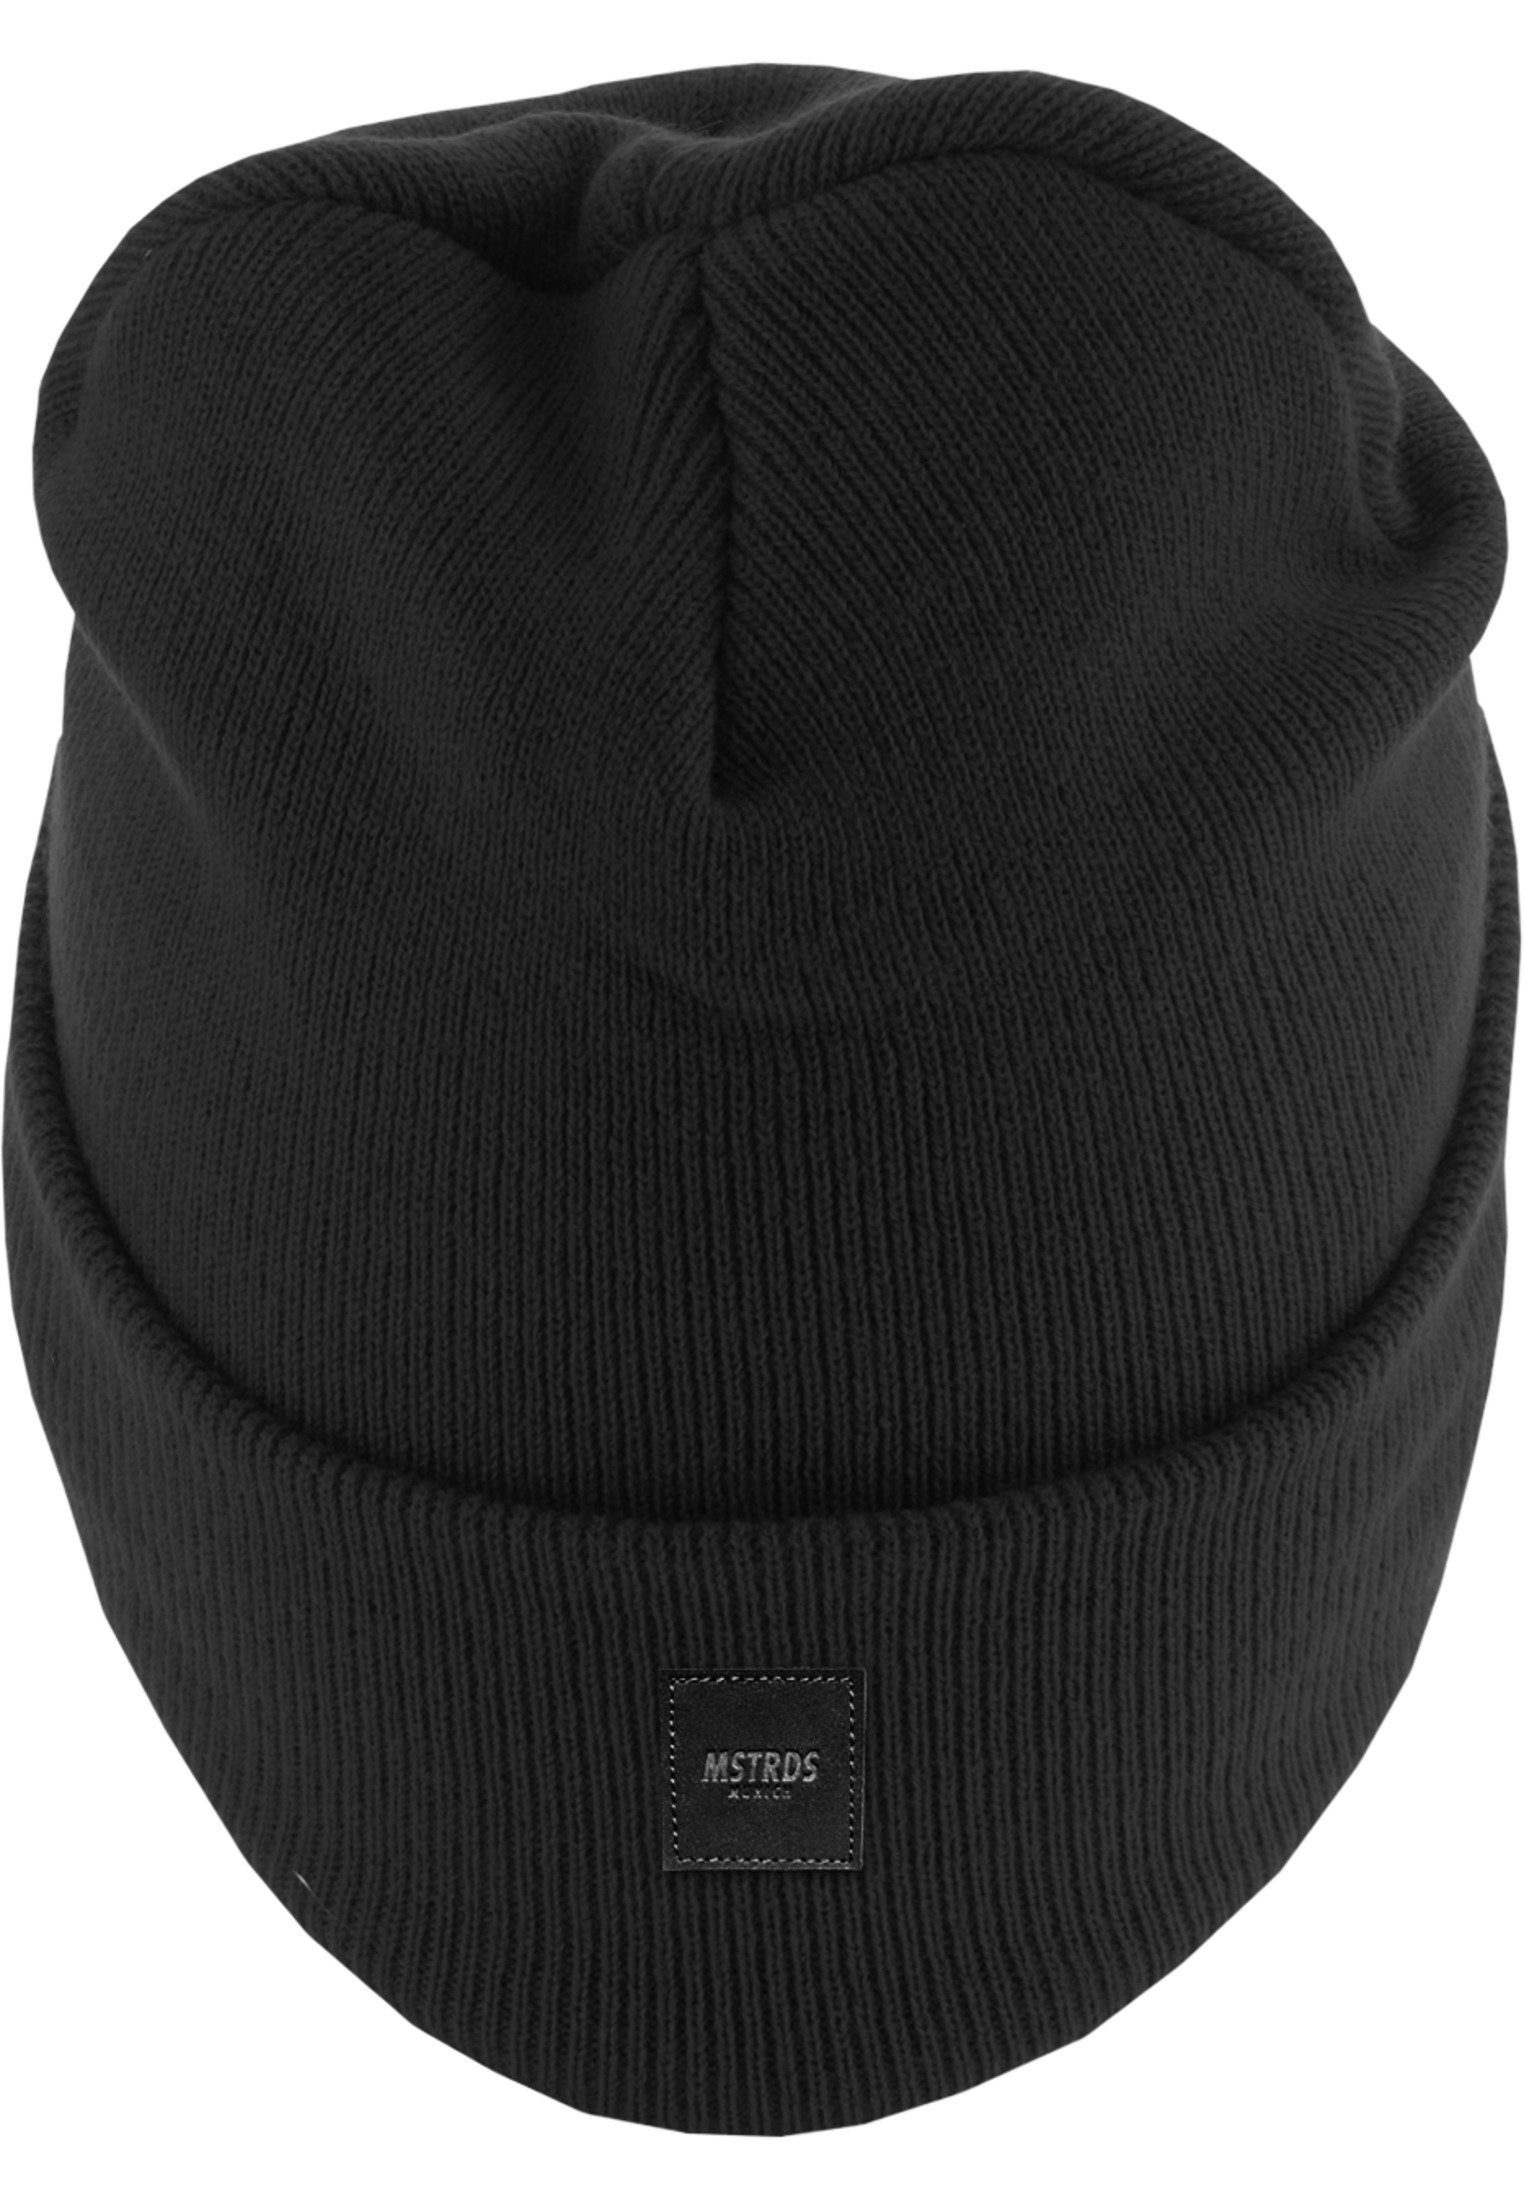 MSTRDS Beanie Beanie Cuff (1-St) Letter Knit Accessoires